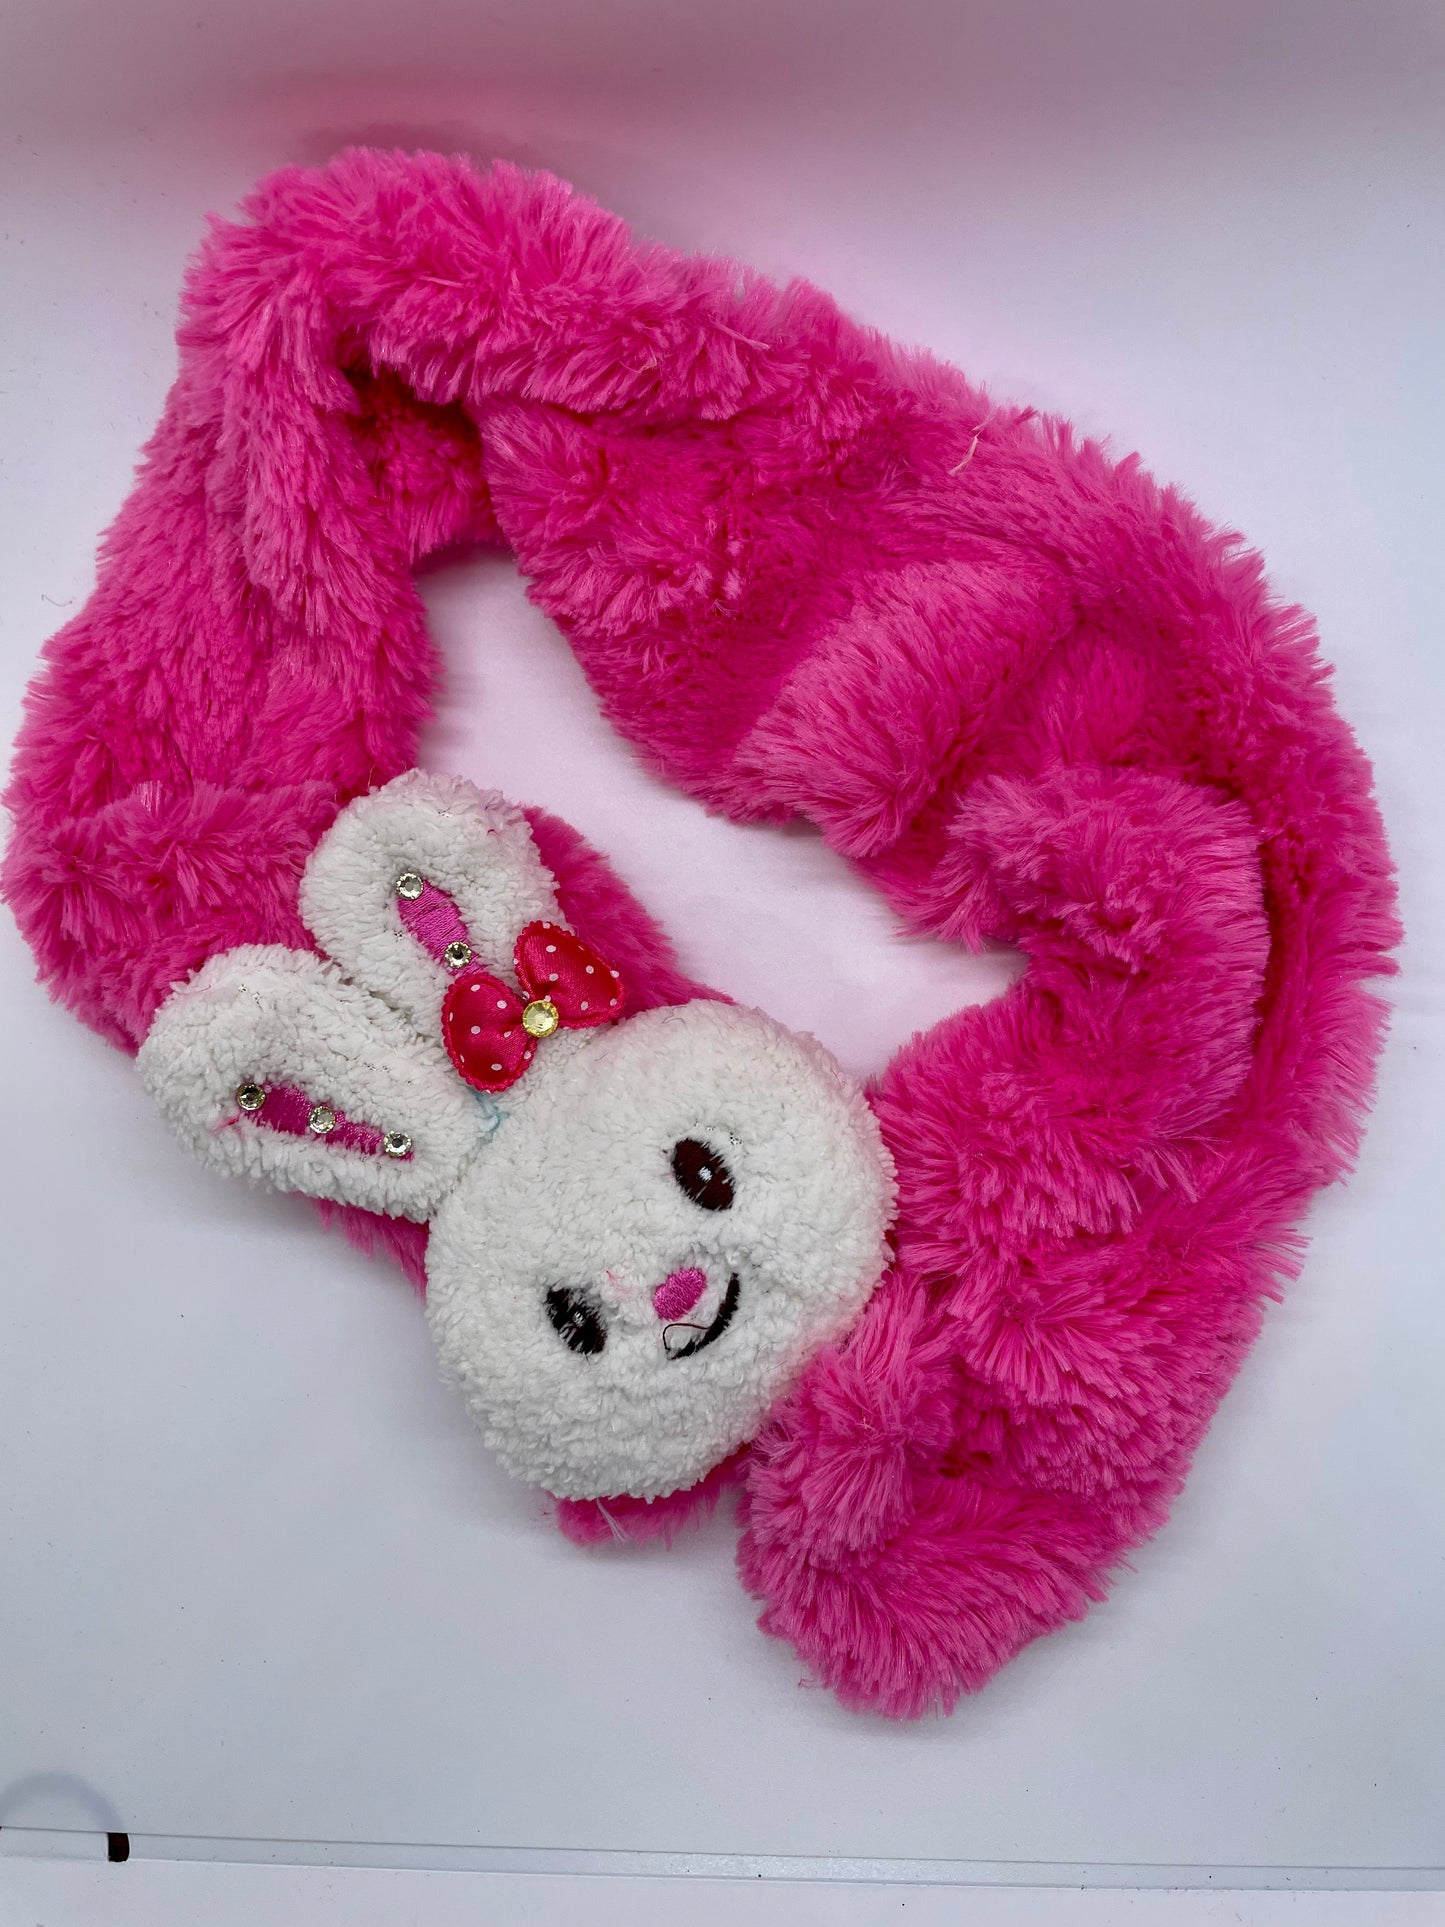 "Pink kid's scarf with a knit flower detail and a fold-over cuff"